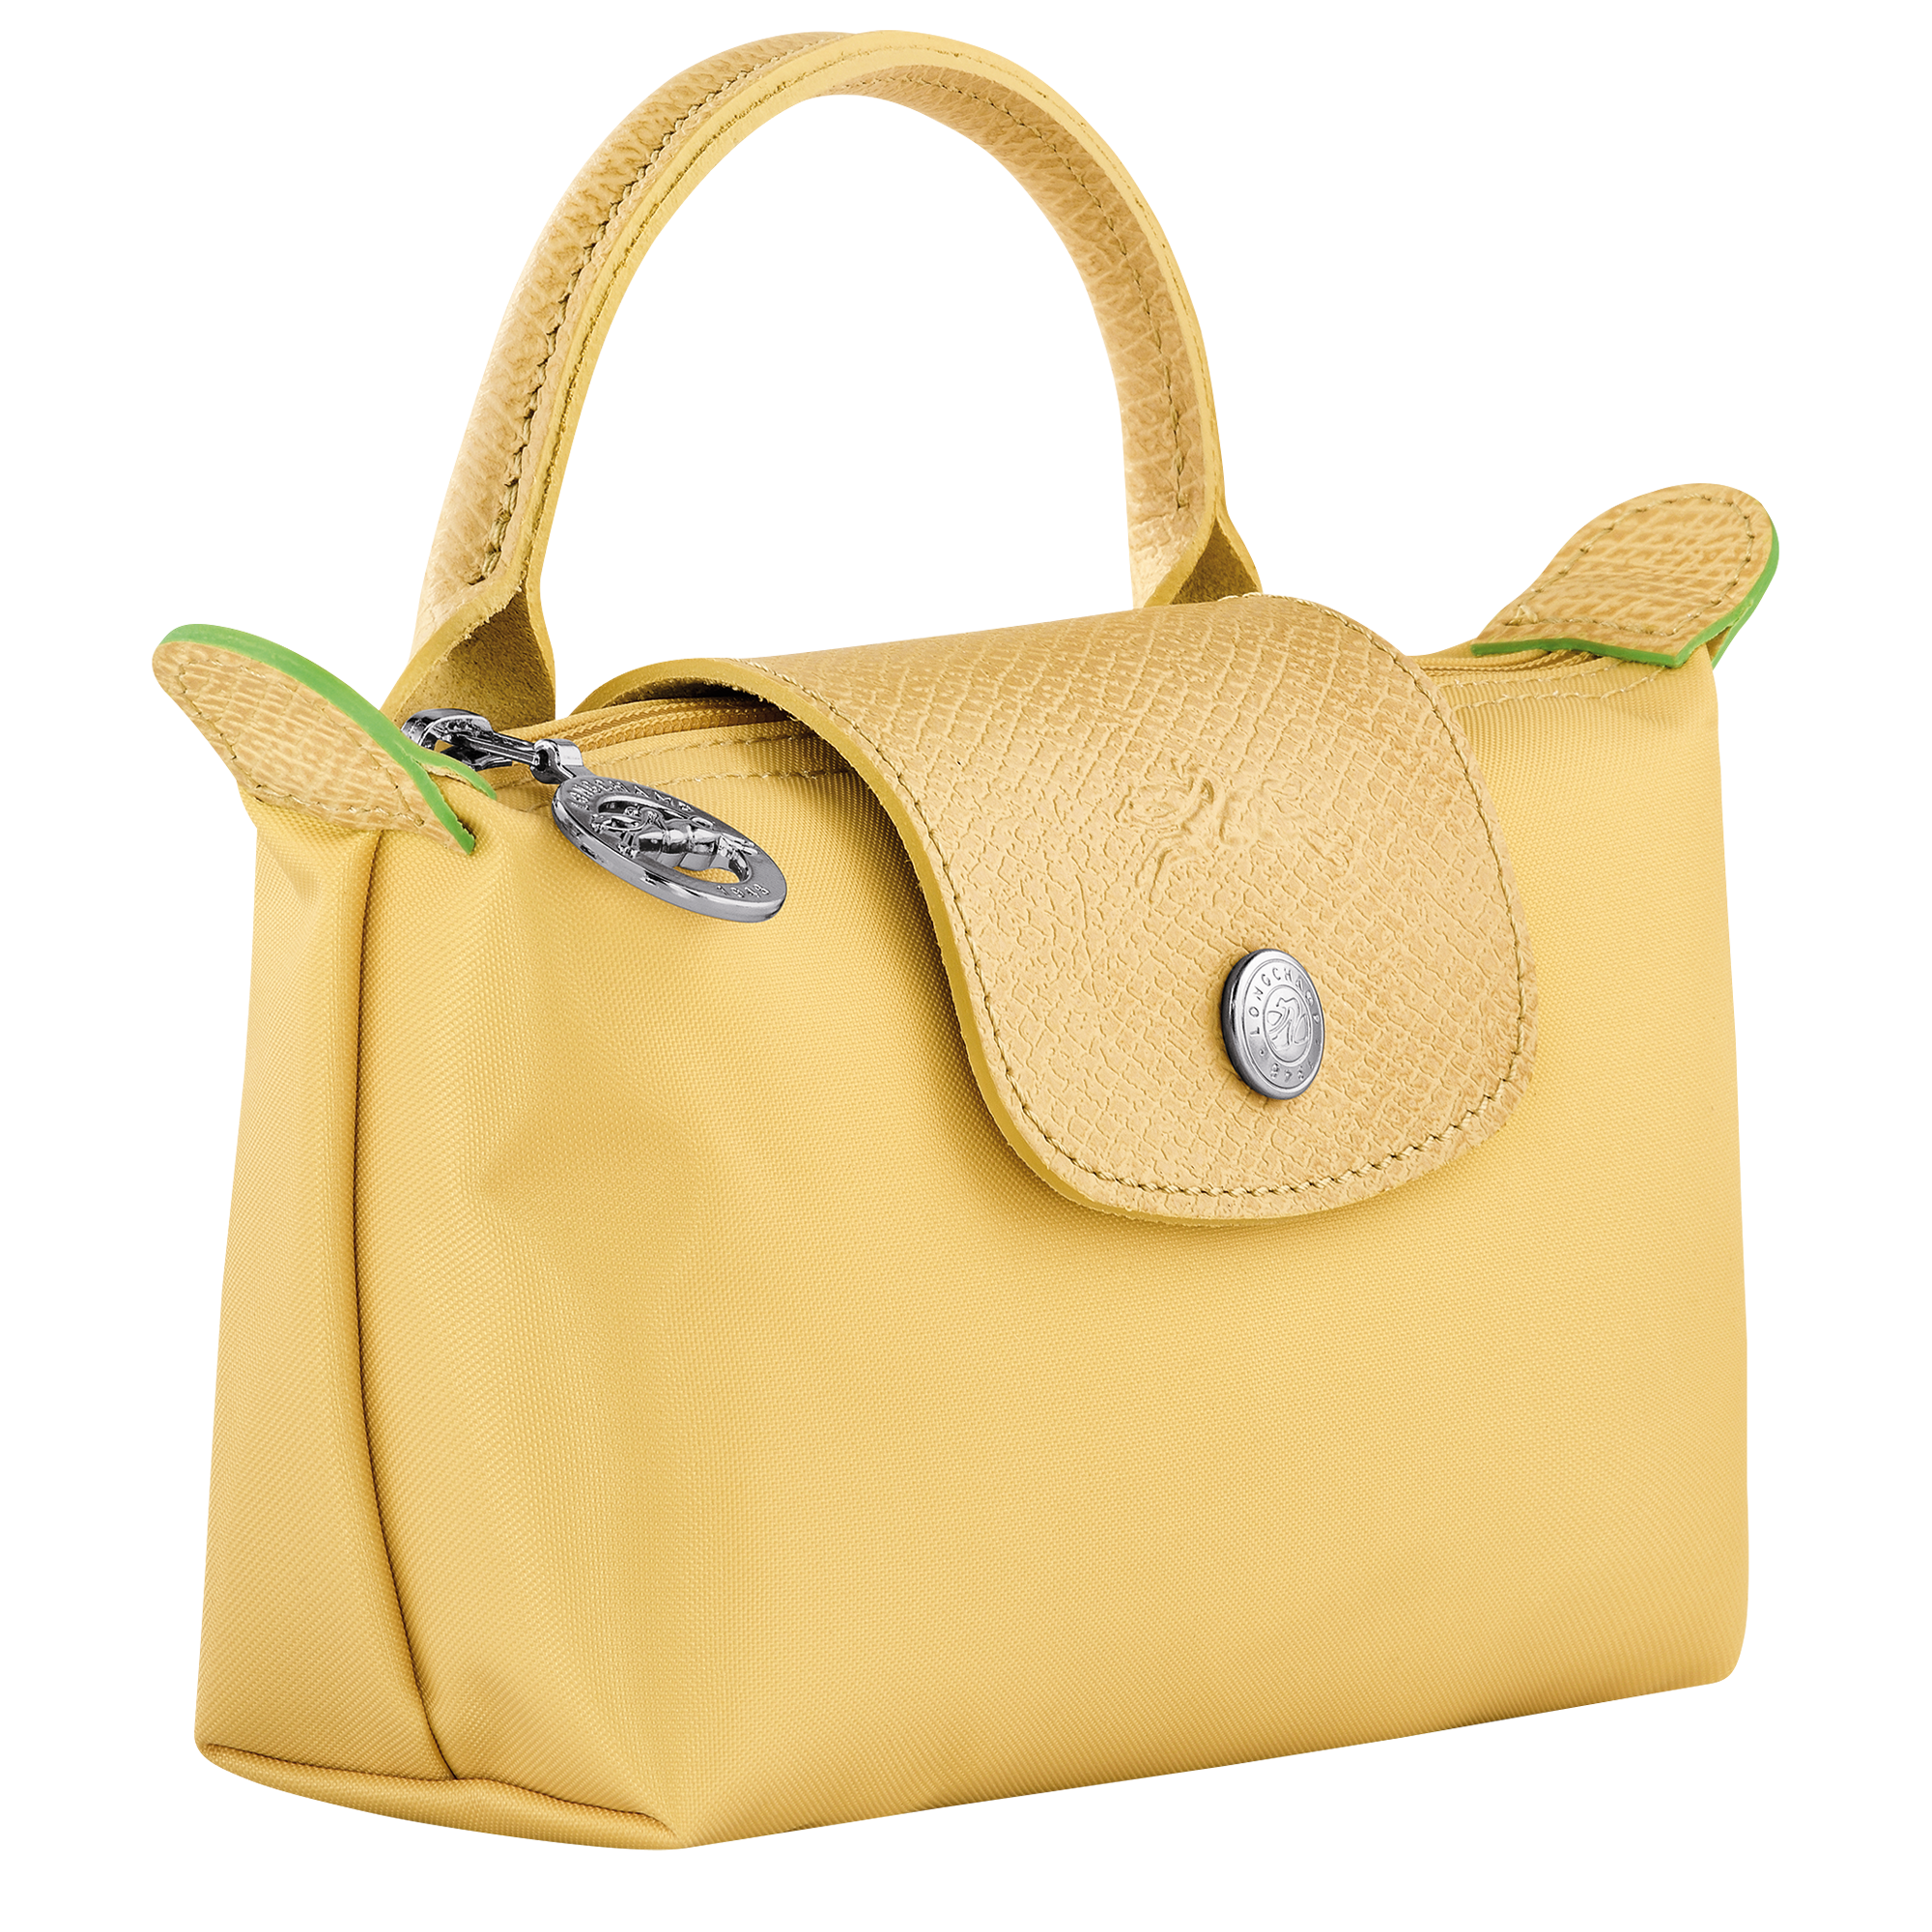 Longchamp LE PLIAGE GREEN - Pouch with handle in Wheat - 2 (SKU: 34175919A81)